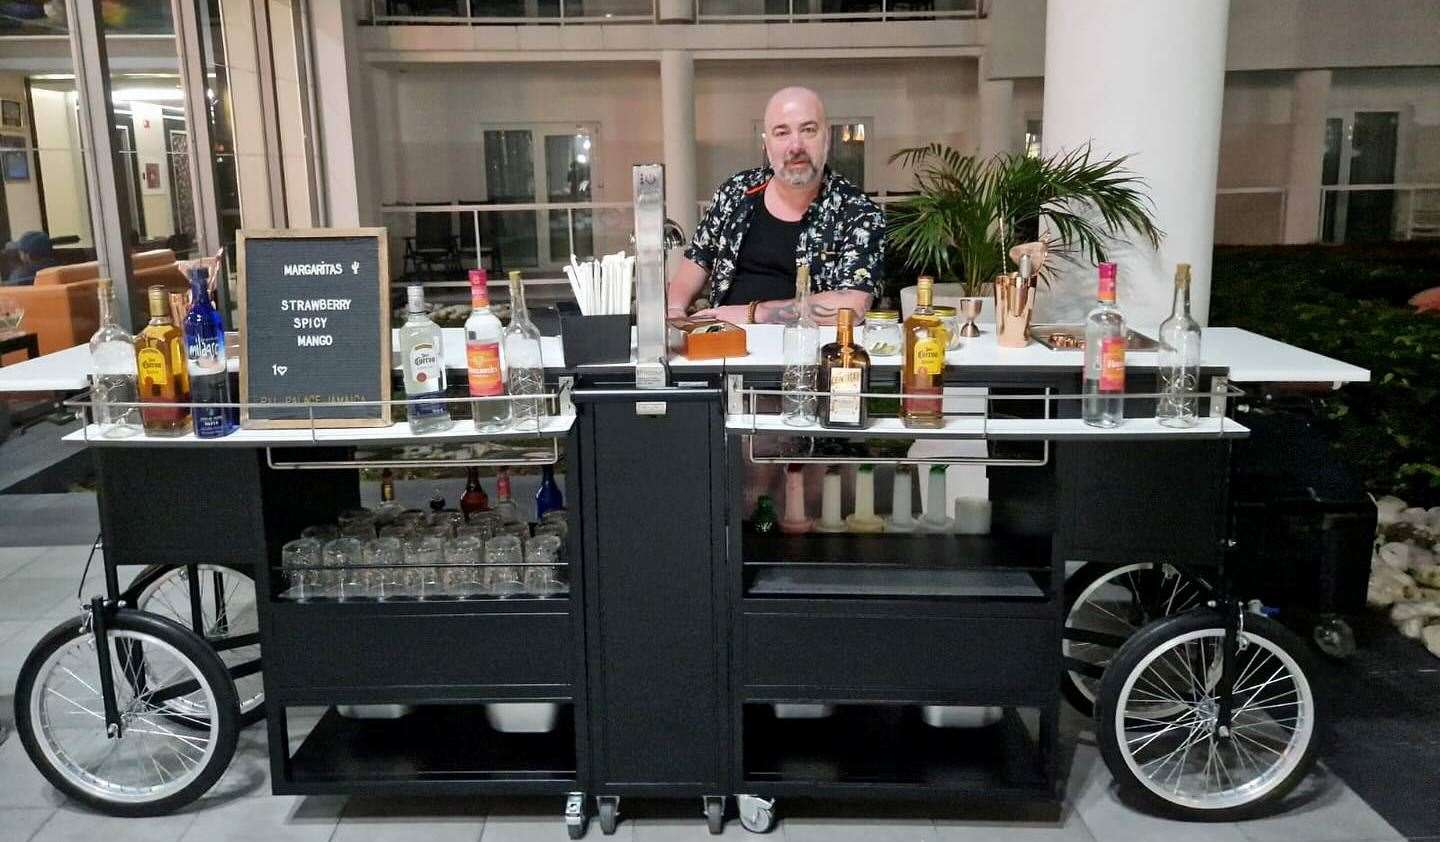 Scott Tulloch, owner of Larry's Mobile Bar, is an expert when it comes to signature cocktails. Picture: Facebook / Larry's Mobile Bar